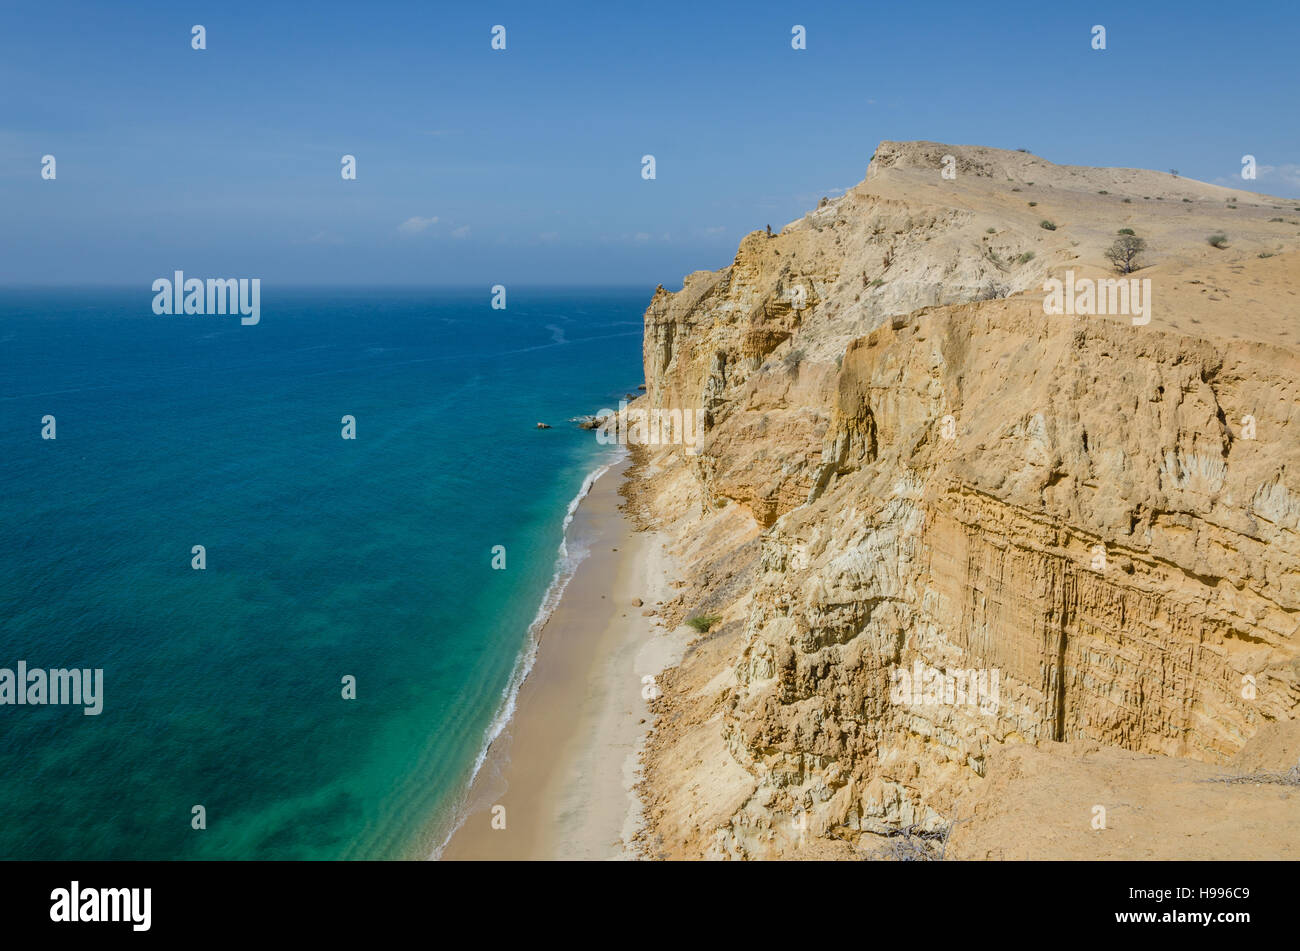 Impressive cliffs with turquoise ocean at the coast at Caotinha, Angola. The yellow sandstone drops sharply down to the sea here. Stock Photo